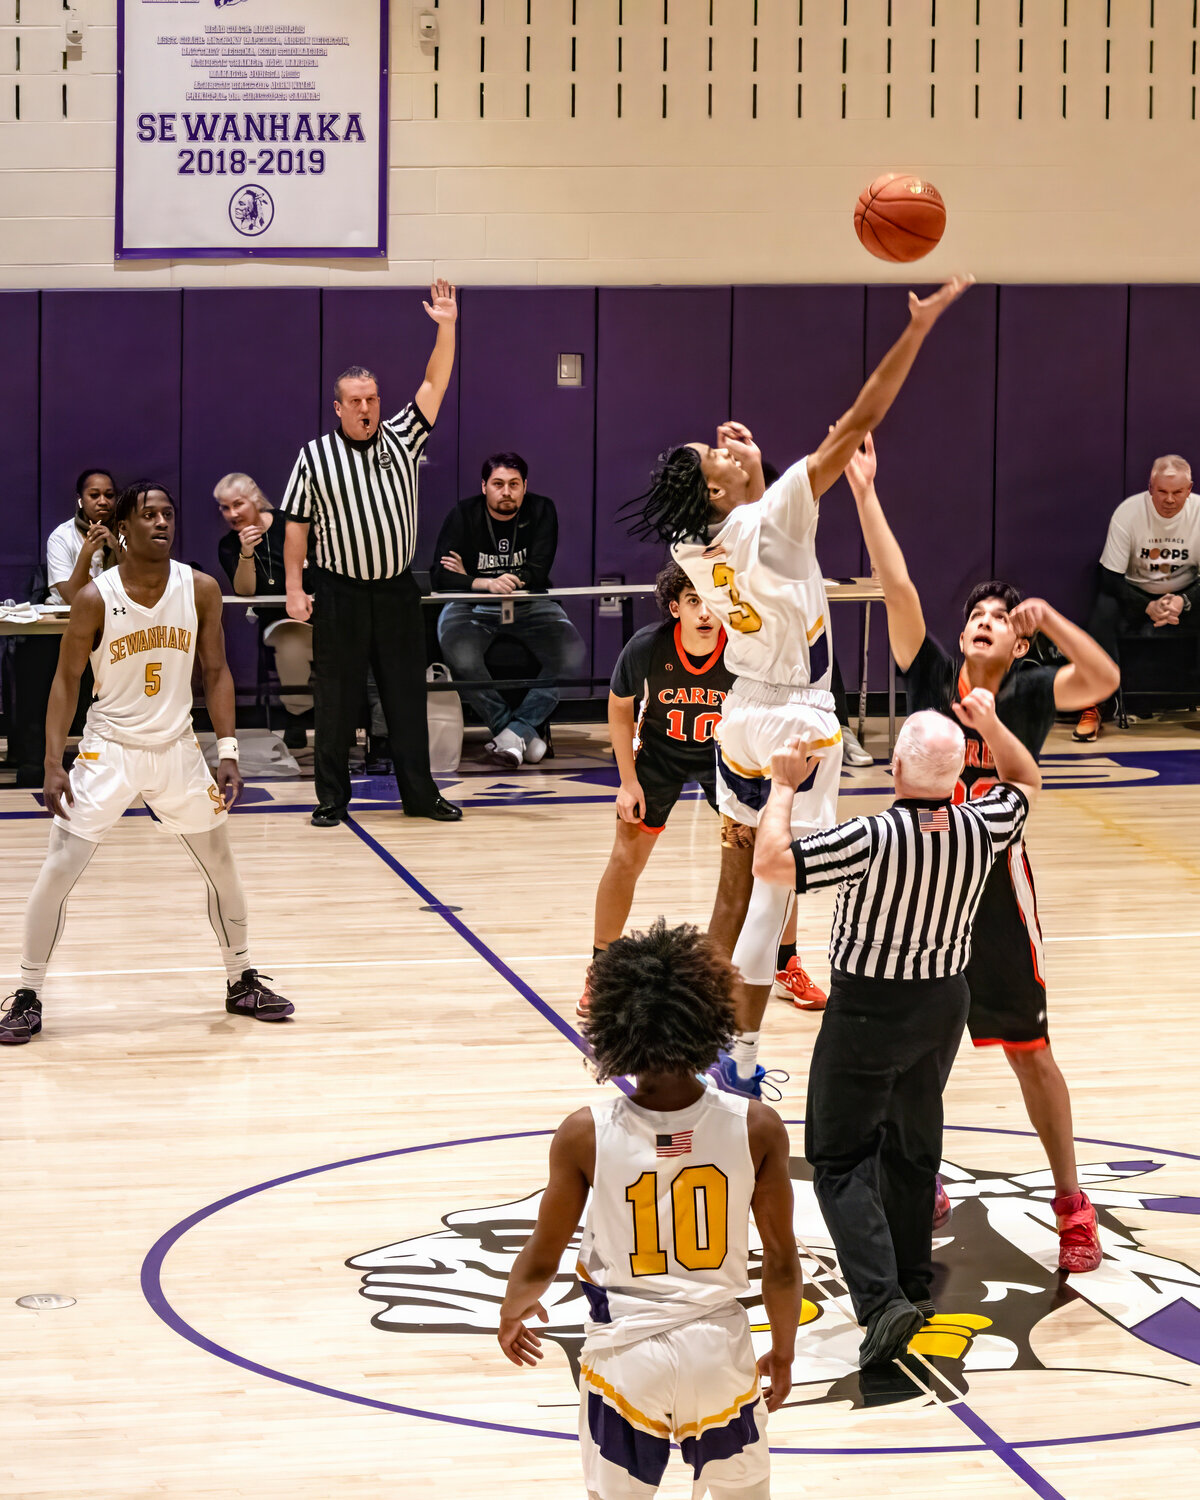 Sewanhaka’s Dylan McLennon gets the tipoff from Carey’s David Yussof as Kevin Colvin, Jordon Tucker and Nasir McMillian look on during the Hoops for Hope charity basketball game at Sewanhaka High School last Friday.